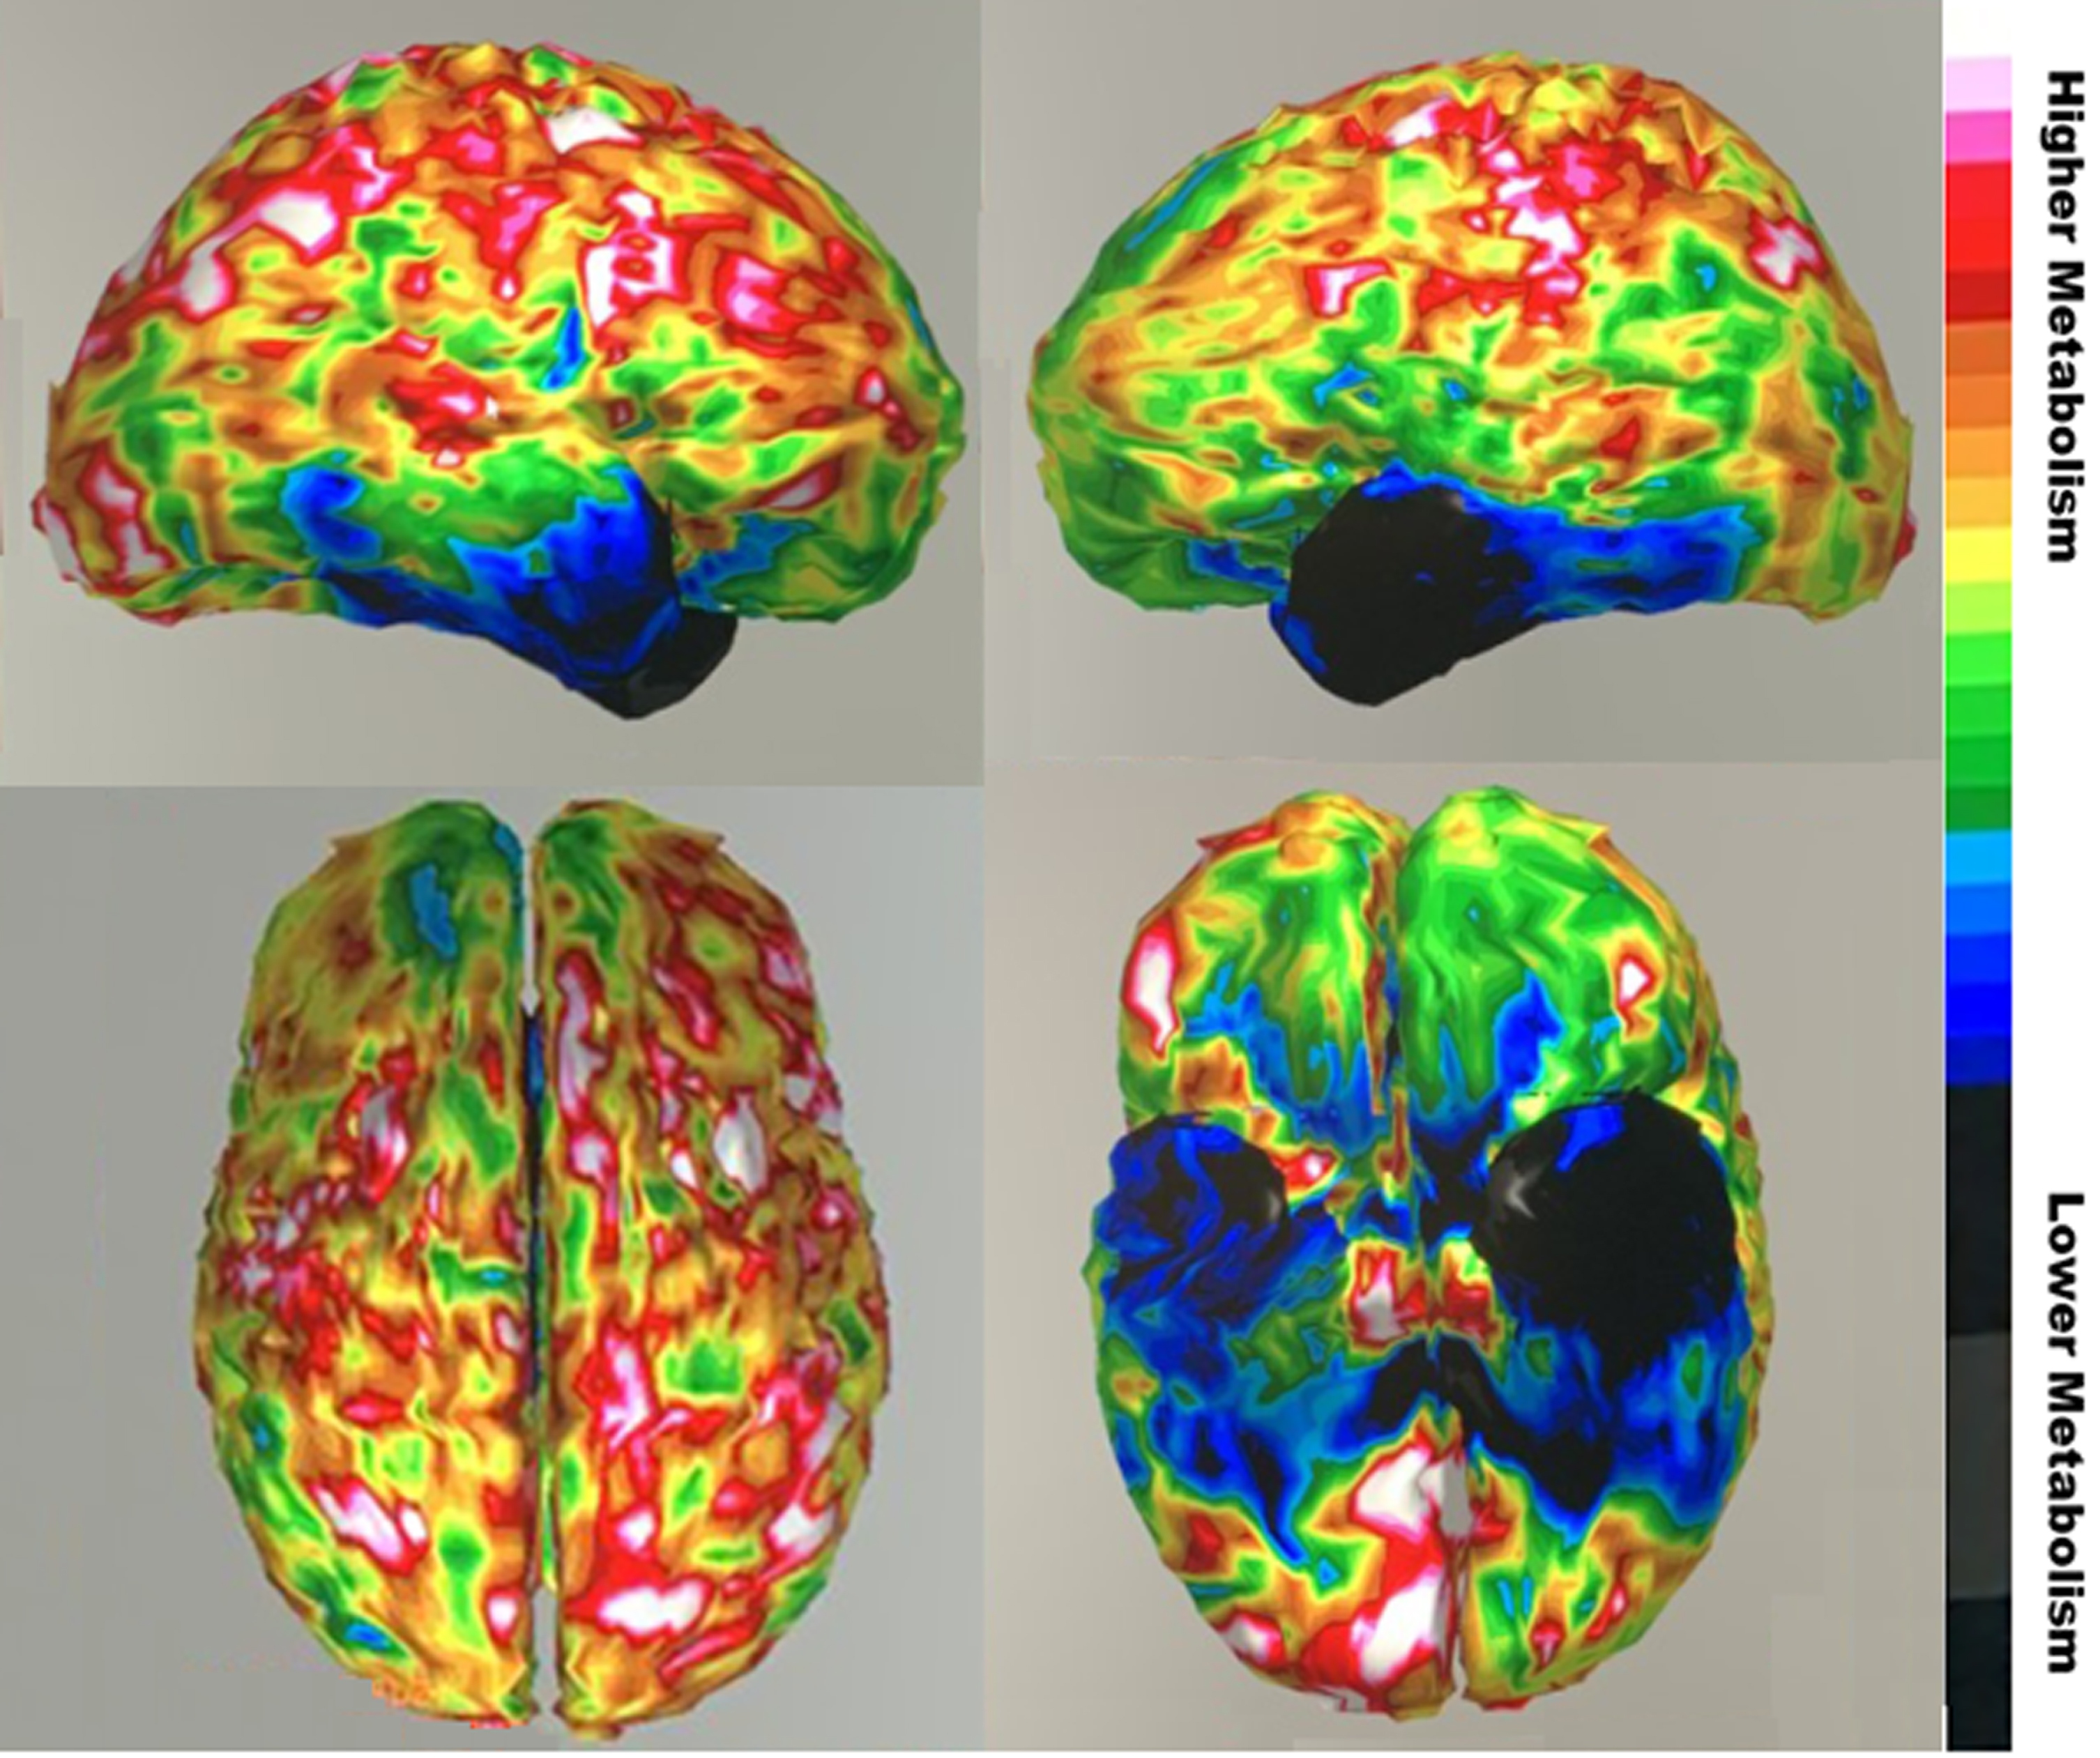 Fluorodeoxy-glucose positron emission tomography (FDG-PET) images showing severe hypometabolism (blue region) in anterior temporal regions, worse on left, with somer extension into the inferior frontal region. (Top sagittal view right hemisphere on left and left hemisphere on right; color bar indicates degree of metabolism). Informed consent for images obtained.